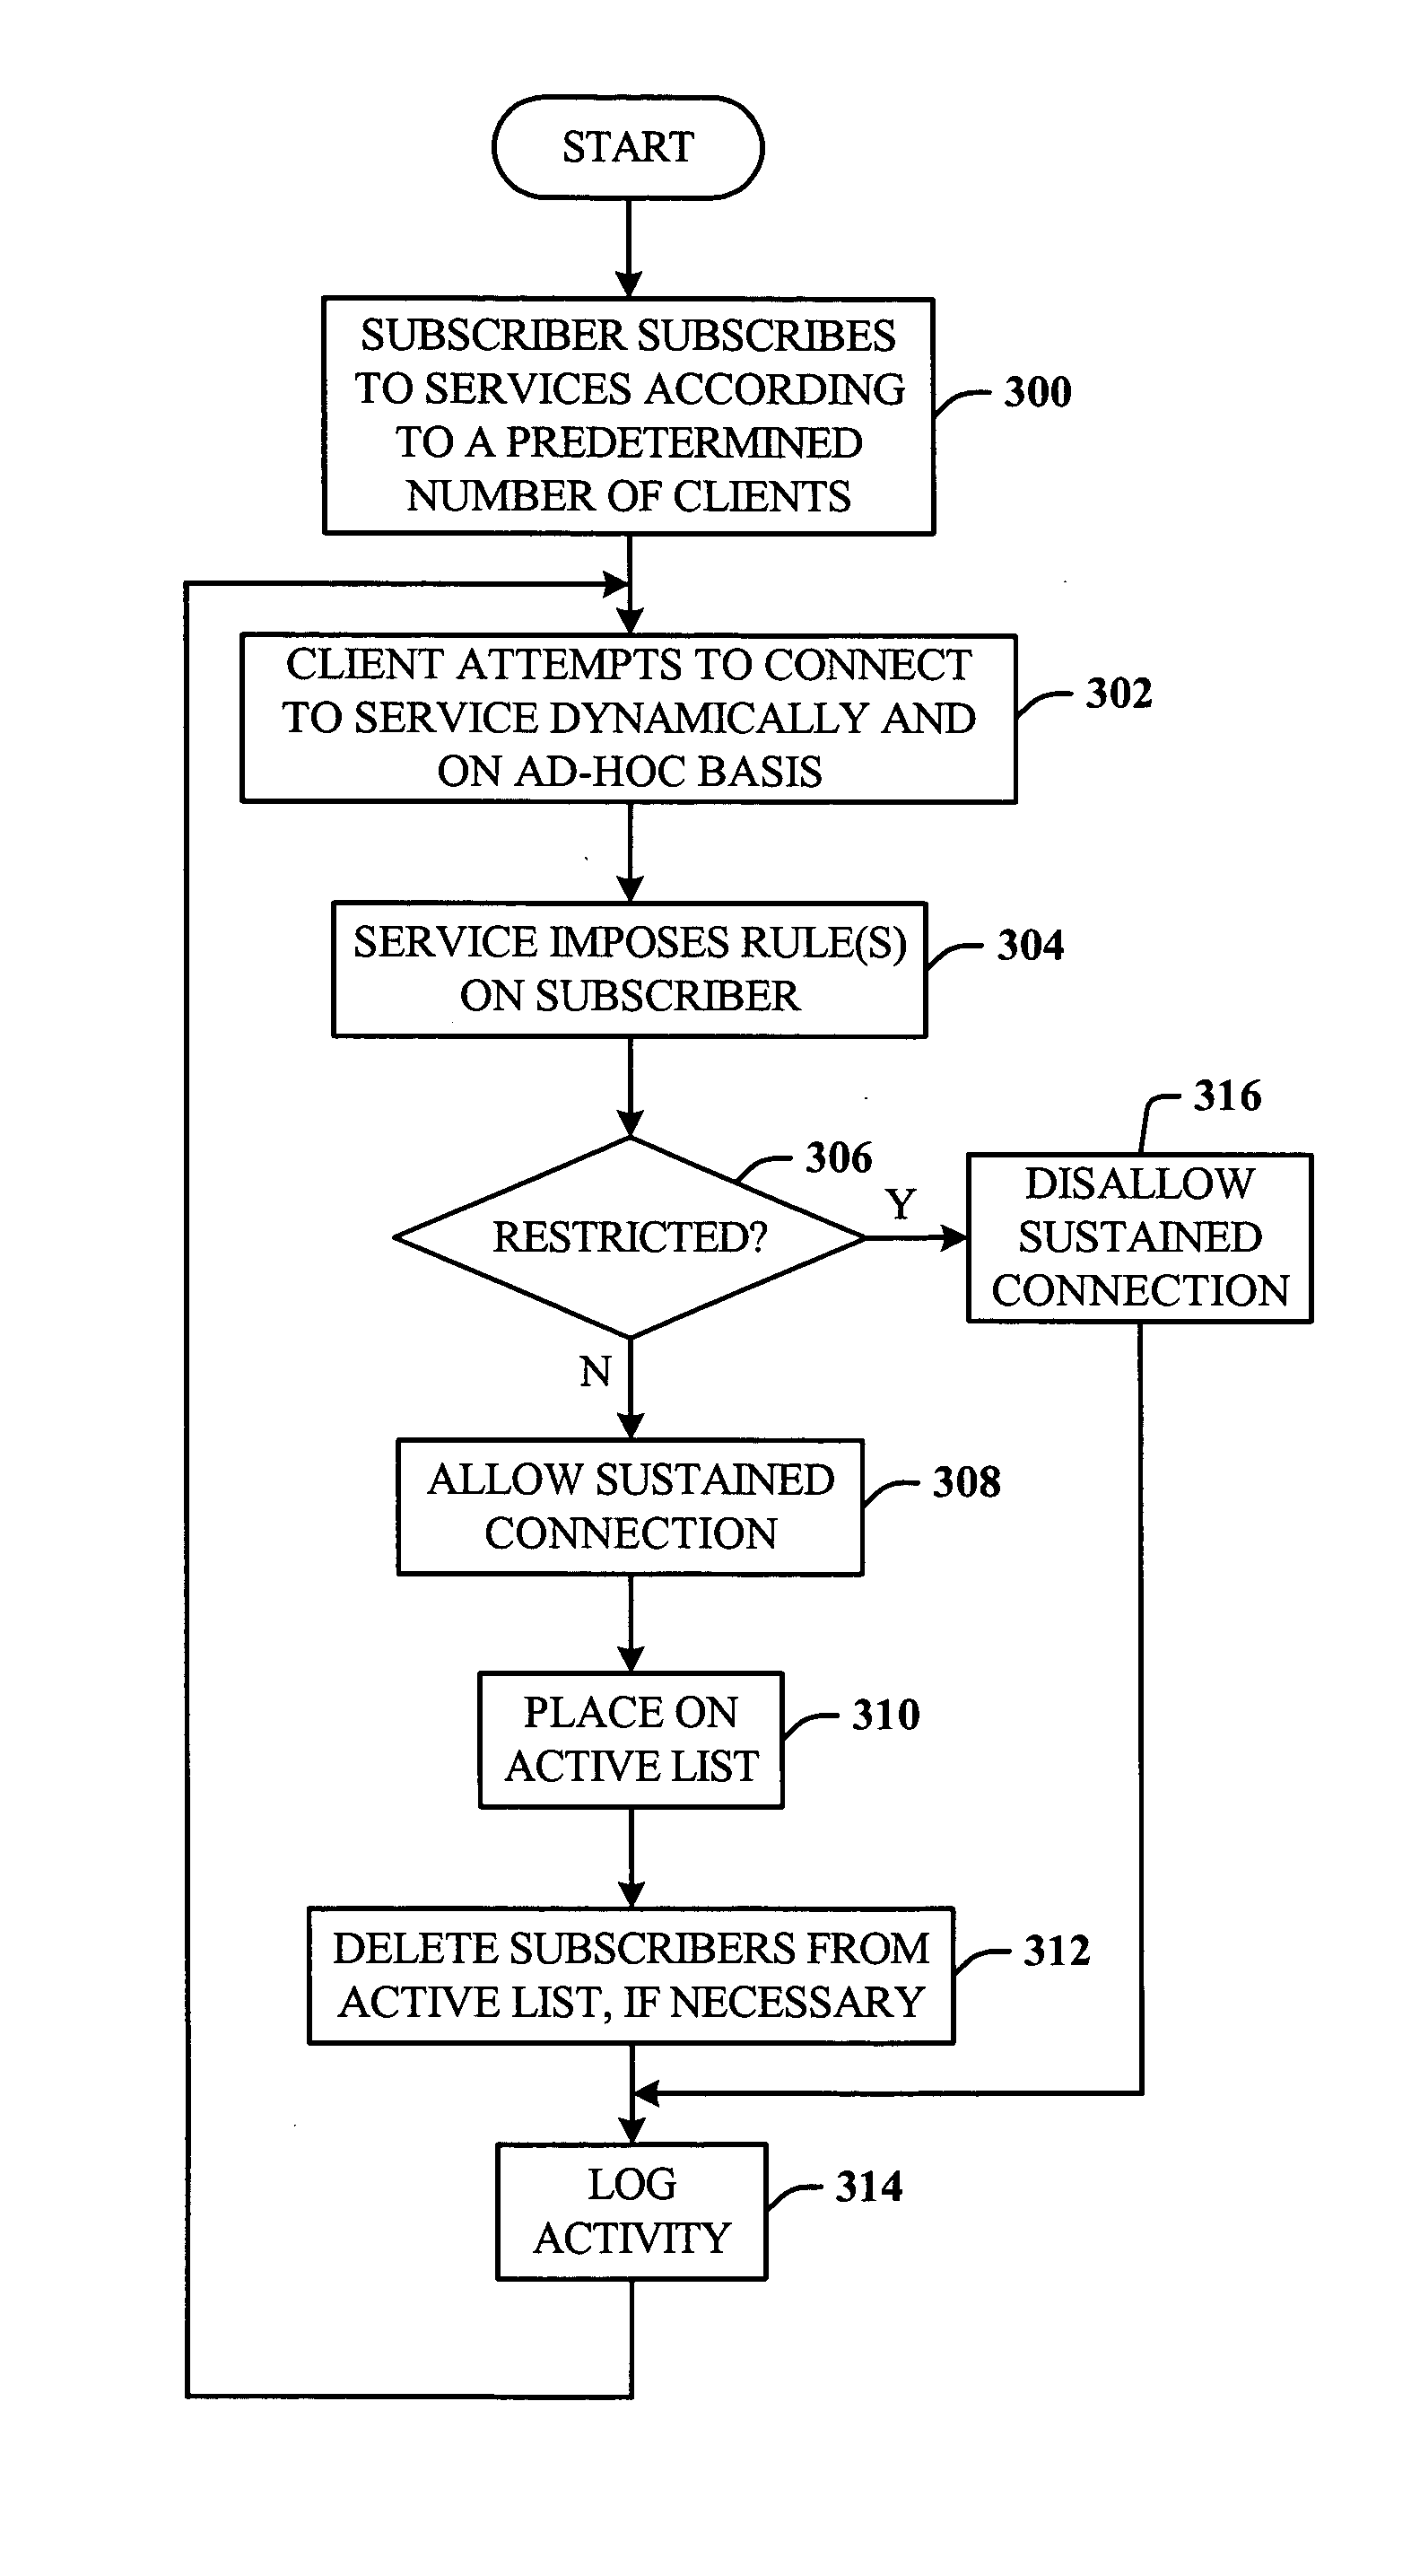 Architecture for controlling access to a service by concurrent clients